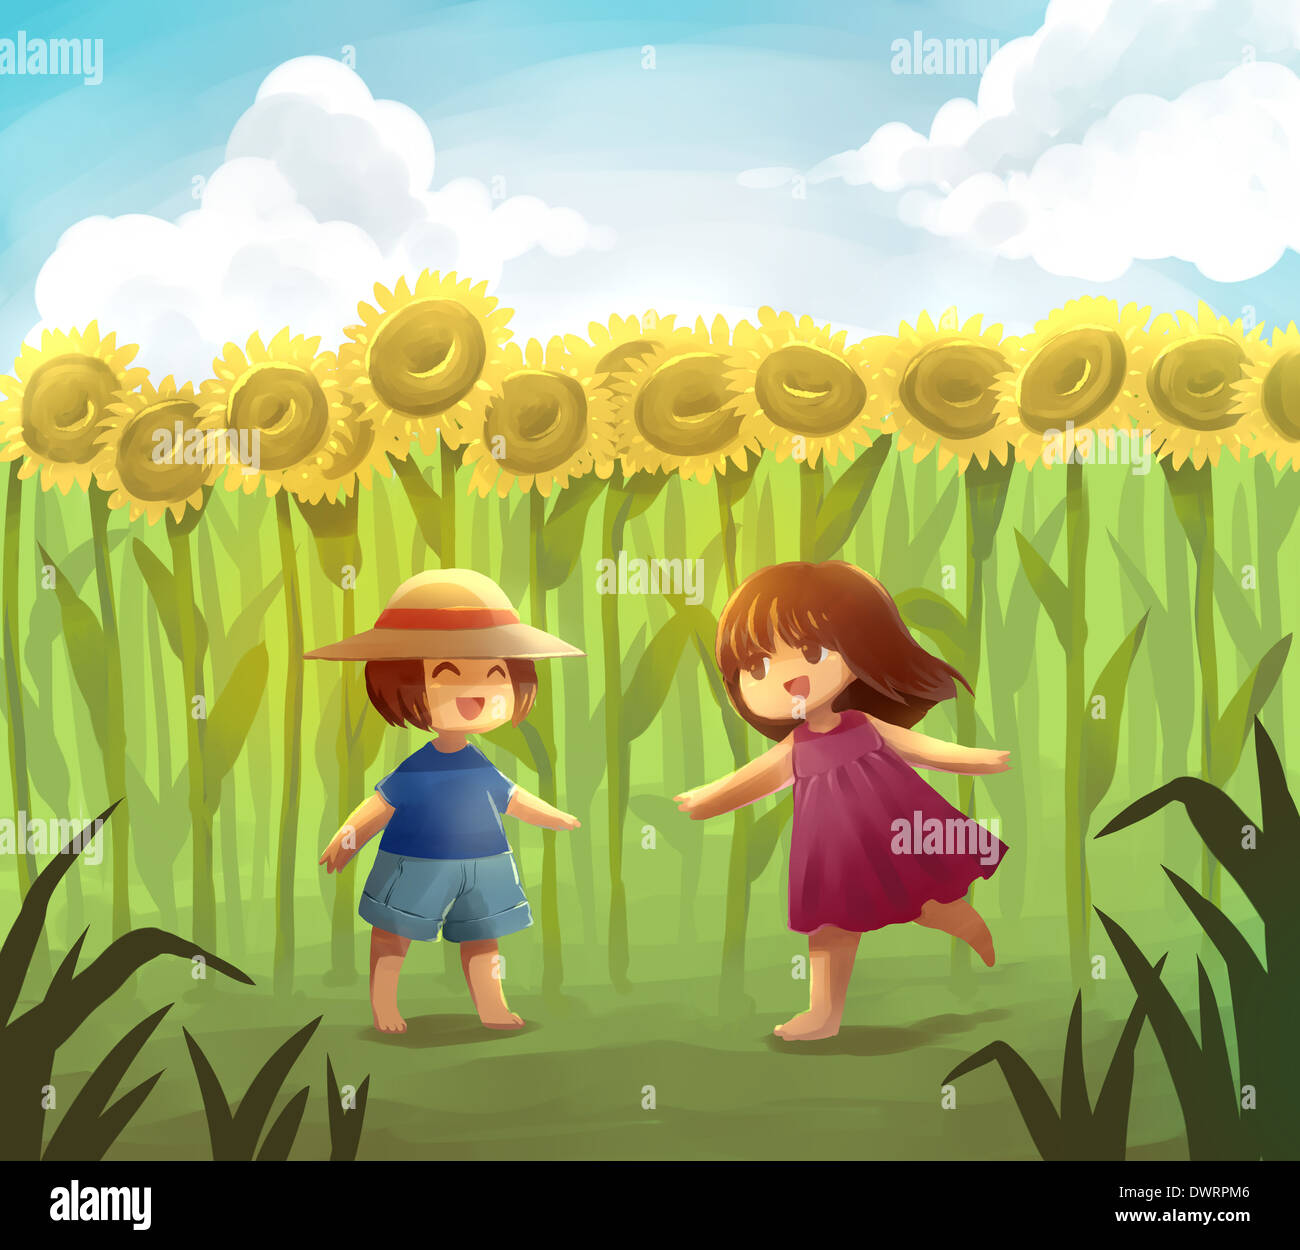 Illustrative image of friends playing in sunflower field representing fun Stock Photo